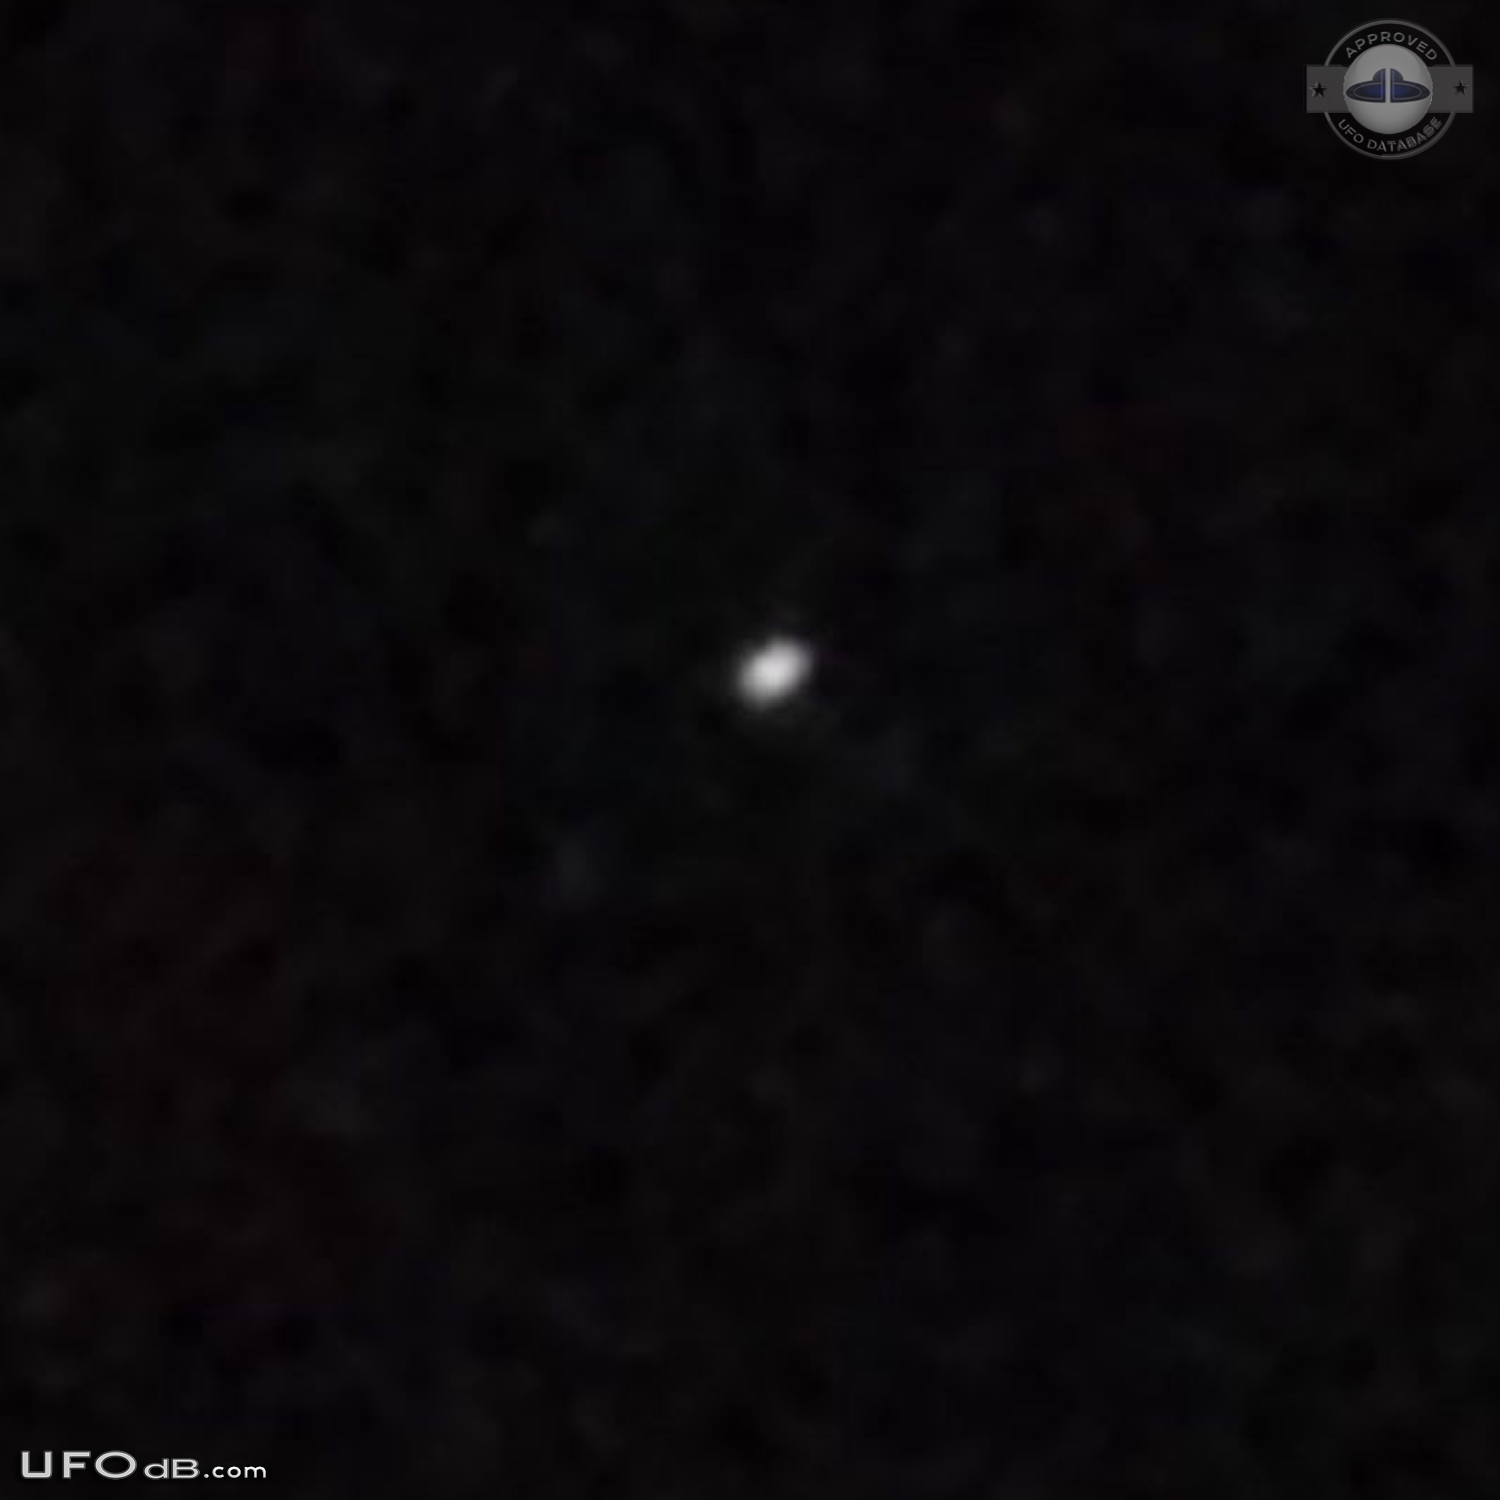 UFO with tentacles with reddish color seen over Magee, Mississipi 2014 UFO Picture #561-6